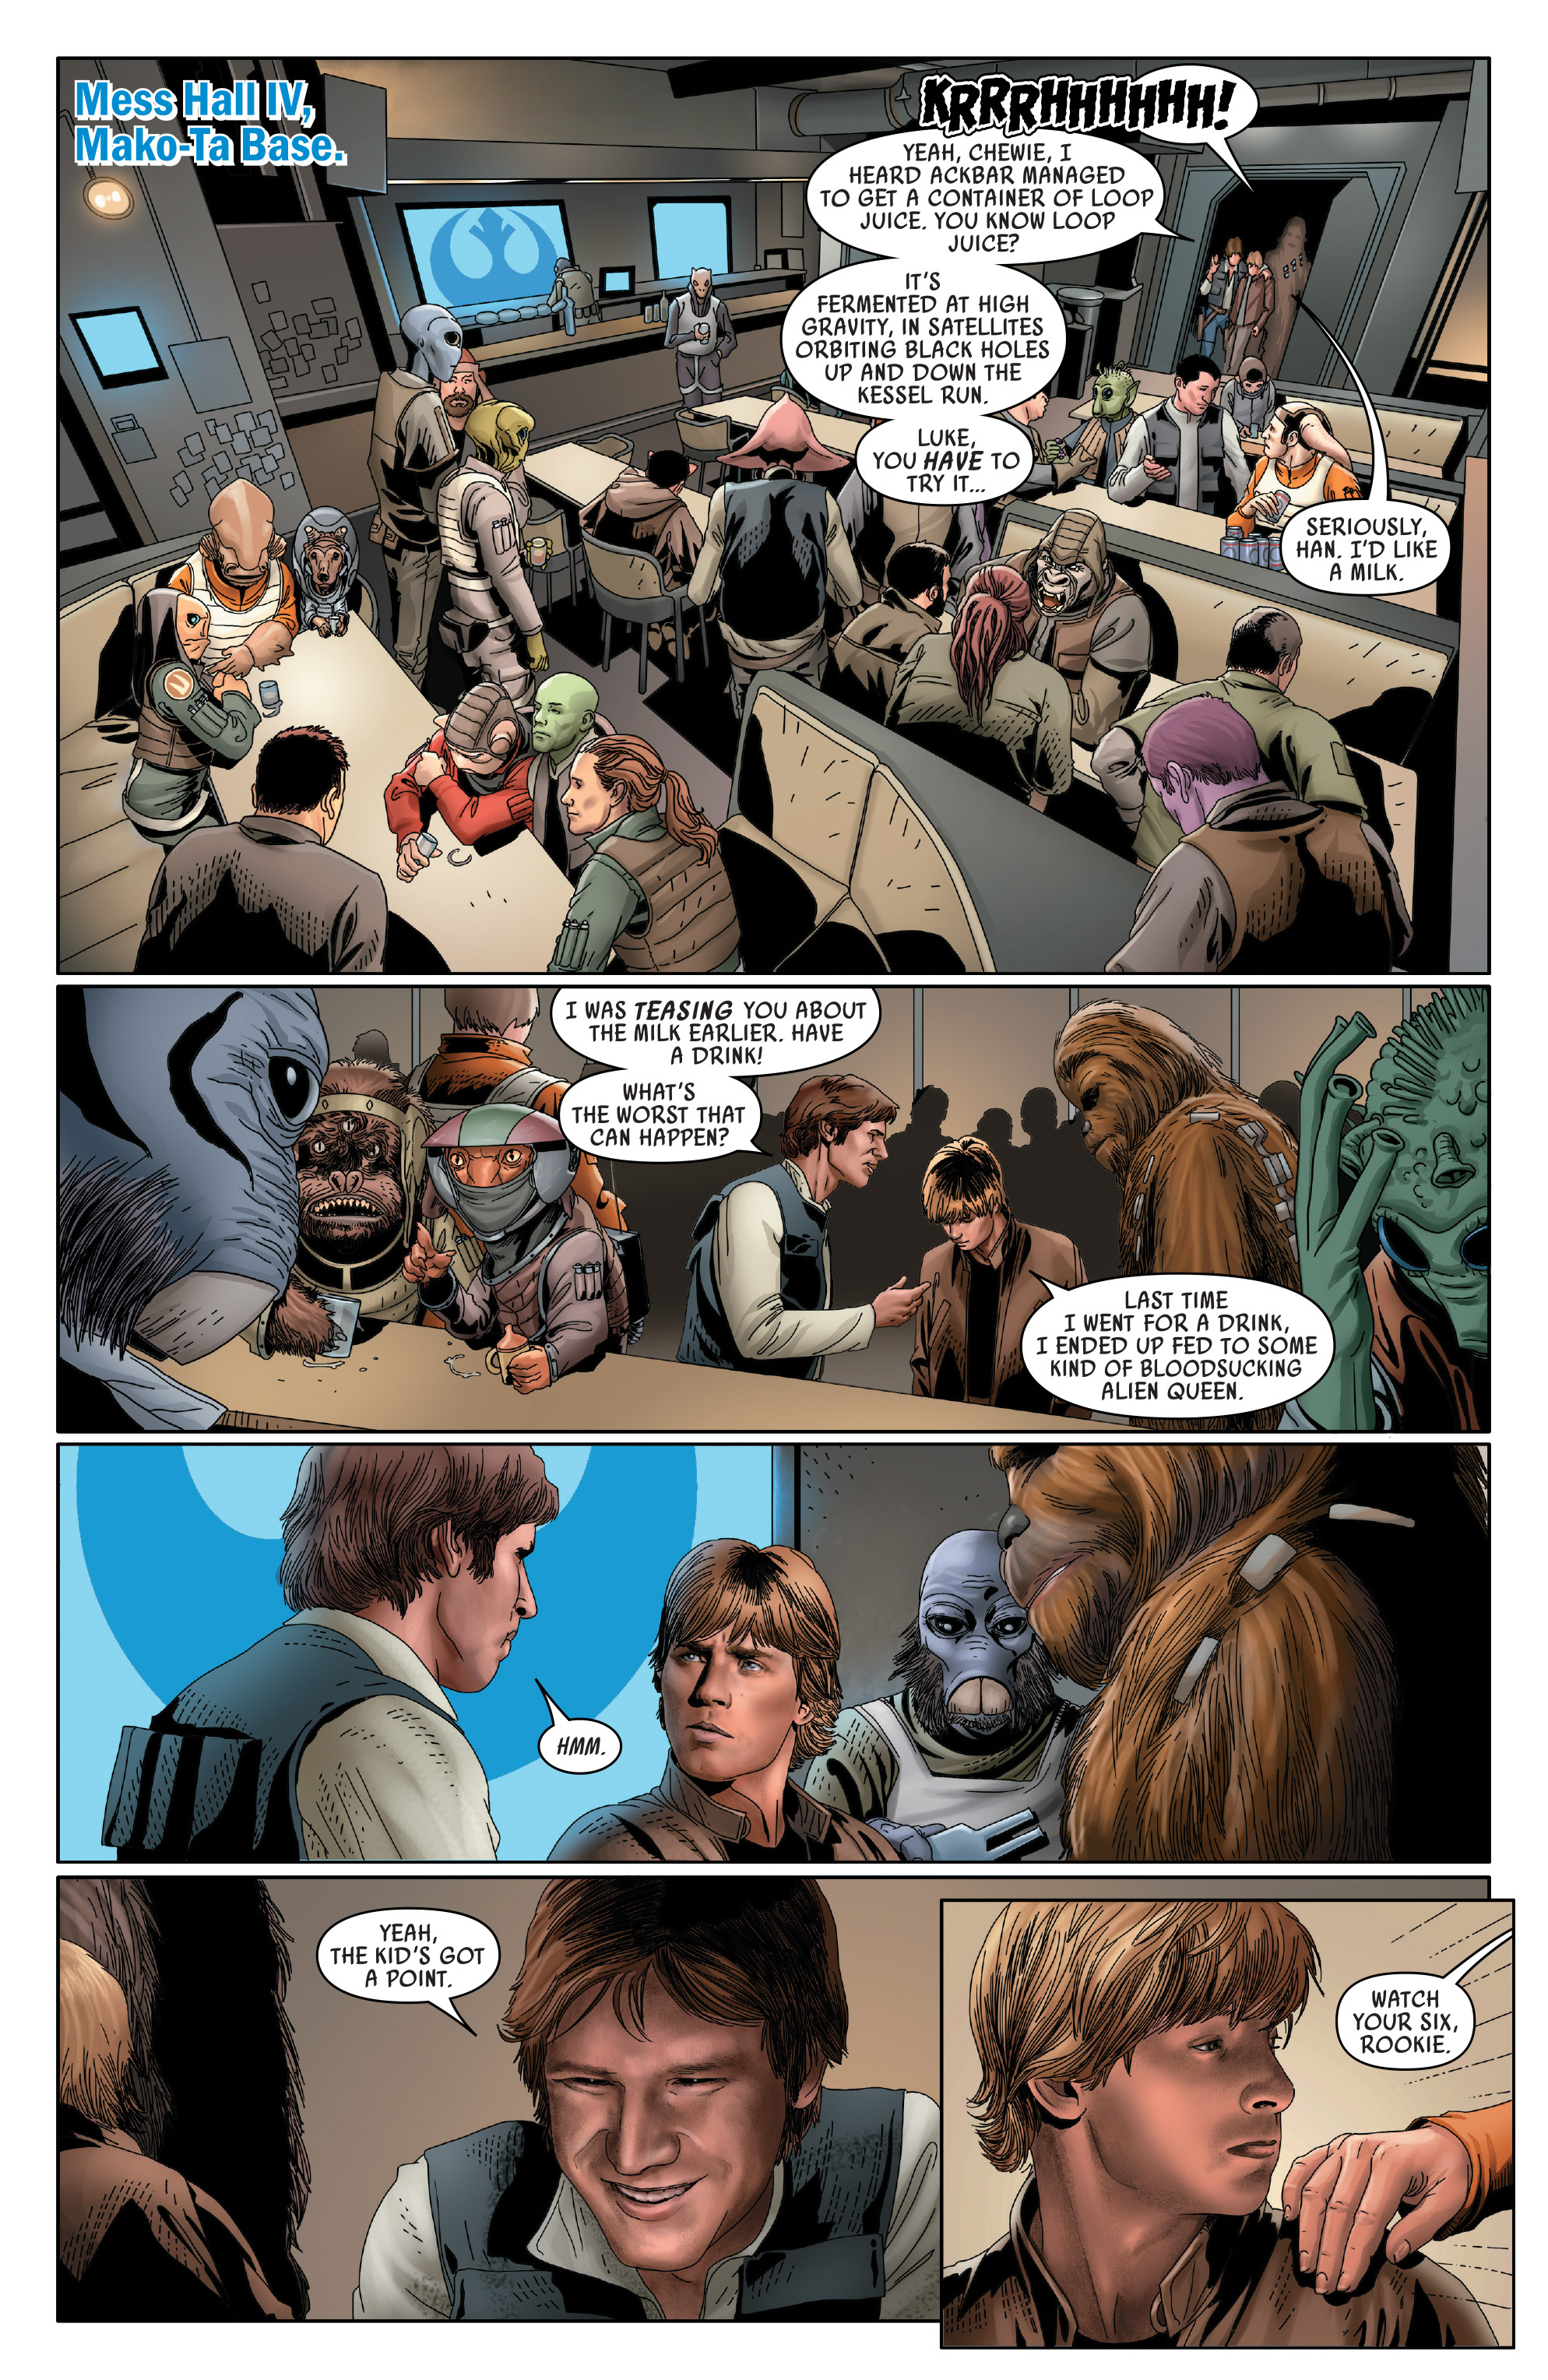 Star Wars (2015-): Chapter 45 - Page 3